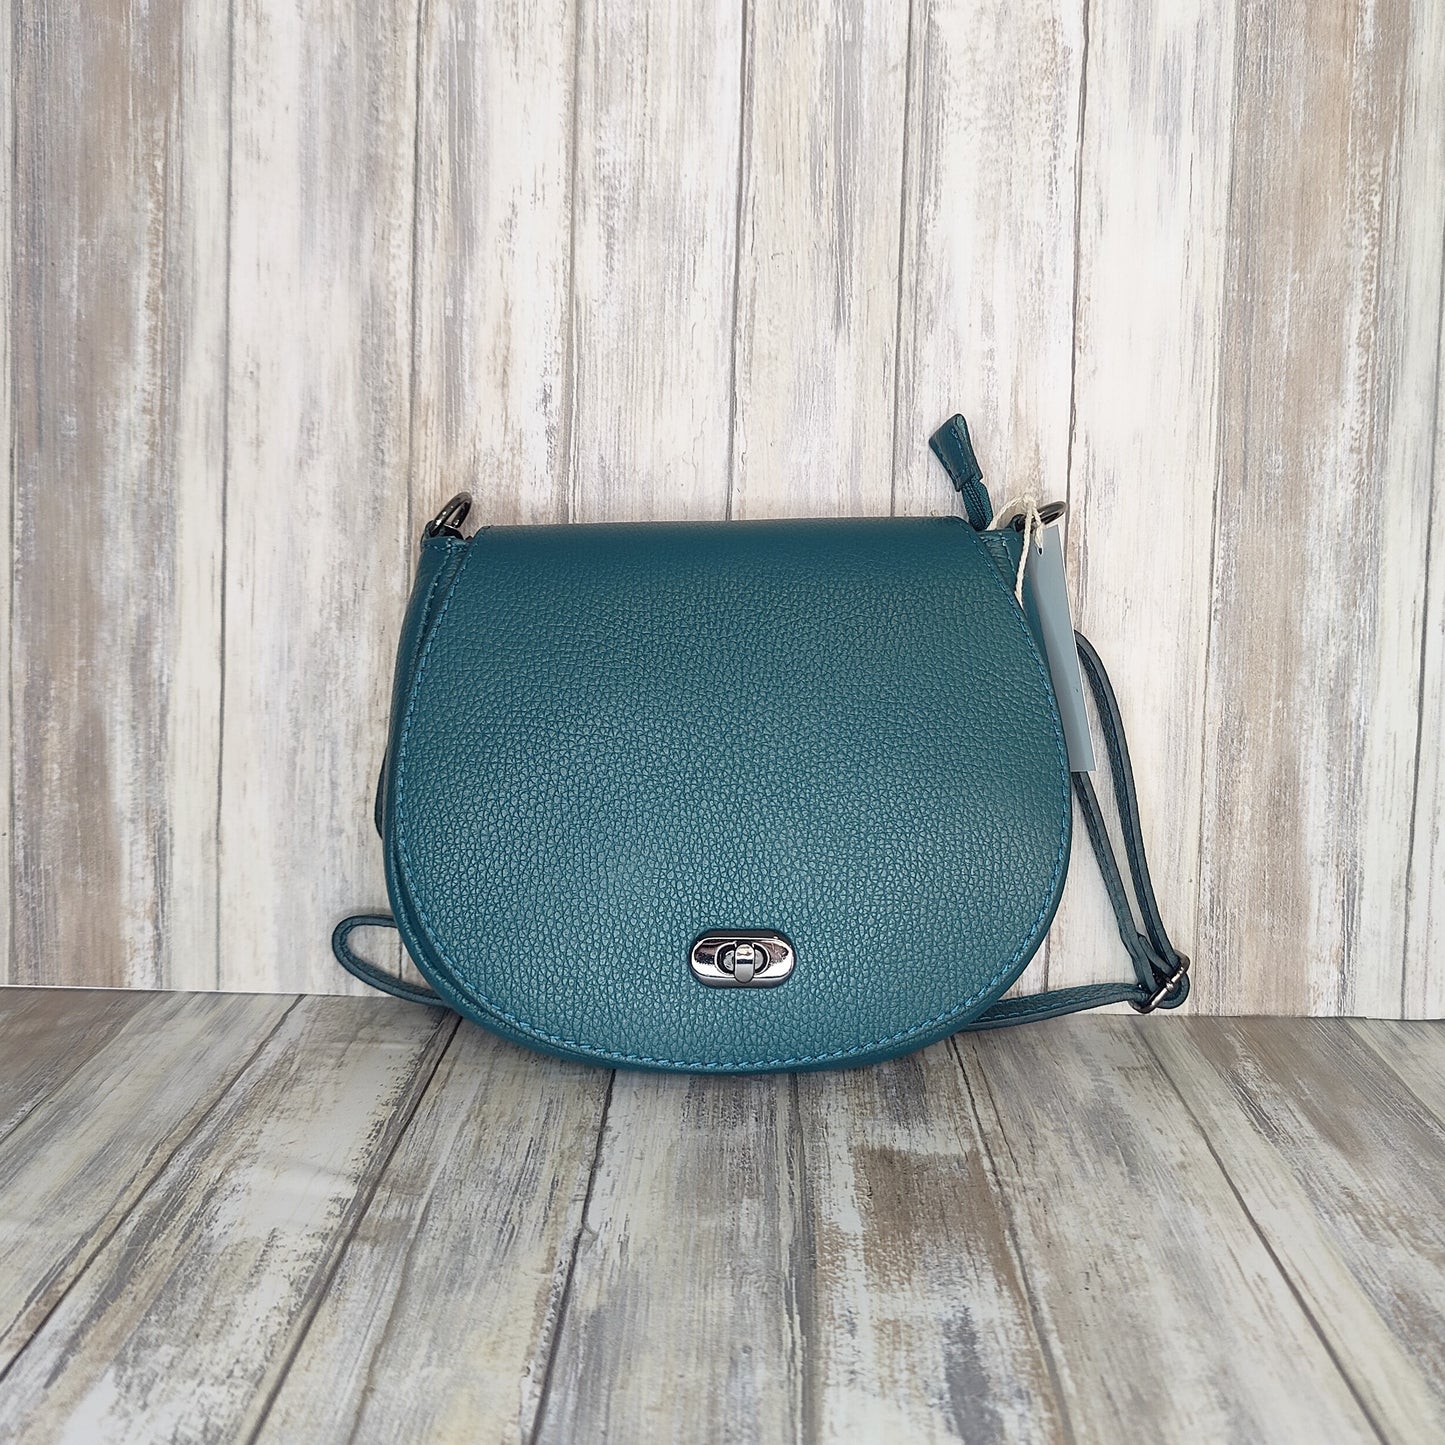 This elegant yet practical saddle bag is crafted from luxuriously soft Italian leather and features a flat silhouette with a postman's lock and zipper closure. The adjustable length strap makes it perfect for carrying as a shoulder bag or cross body.   Outer pocket with zip   Internal zip pocket   Adjustable detachable strap   Silver Hardware   L:23cm x H:16cm x W:4cm